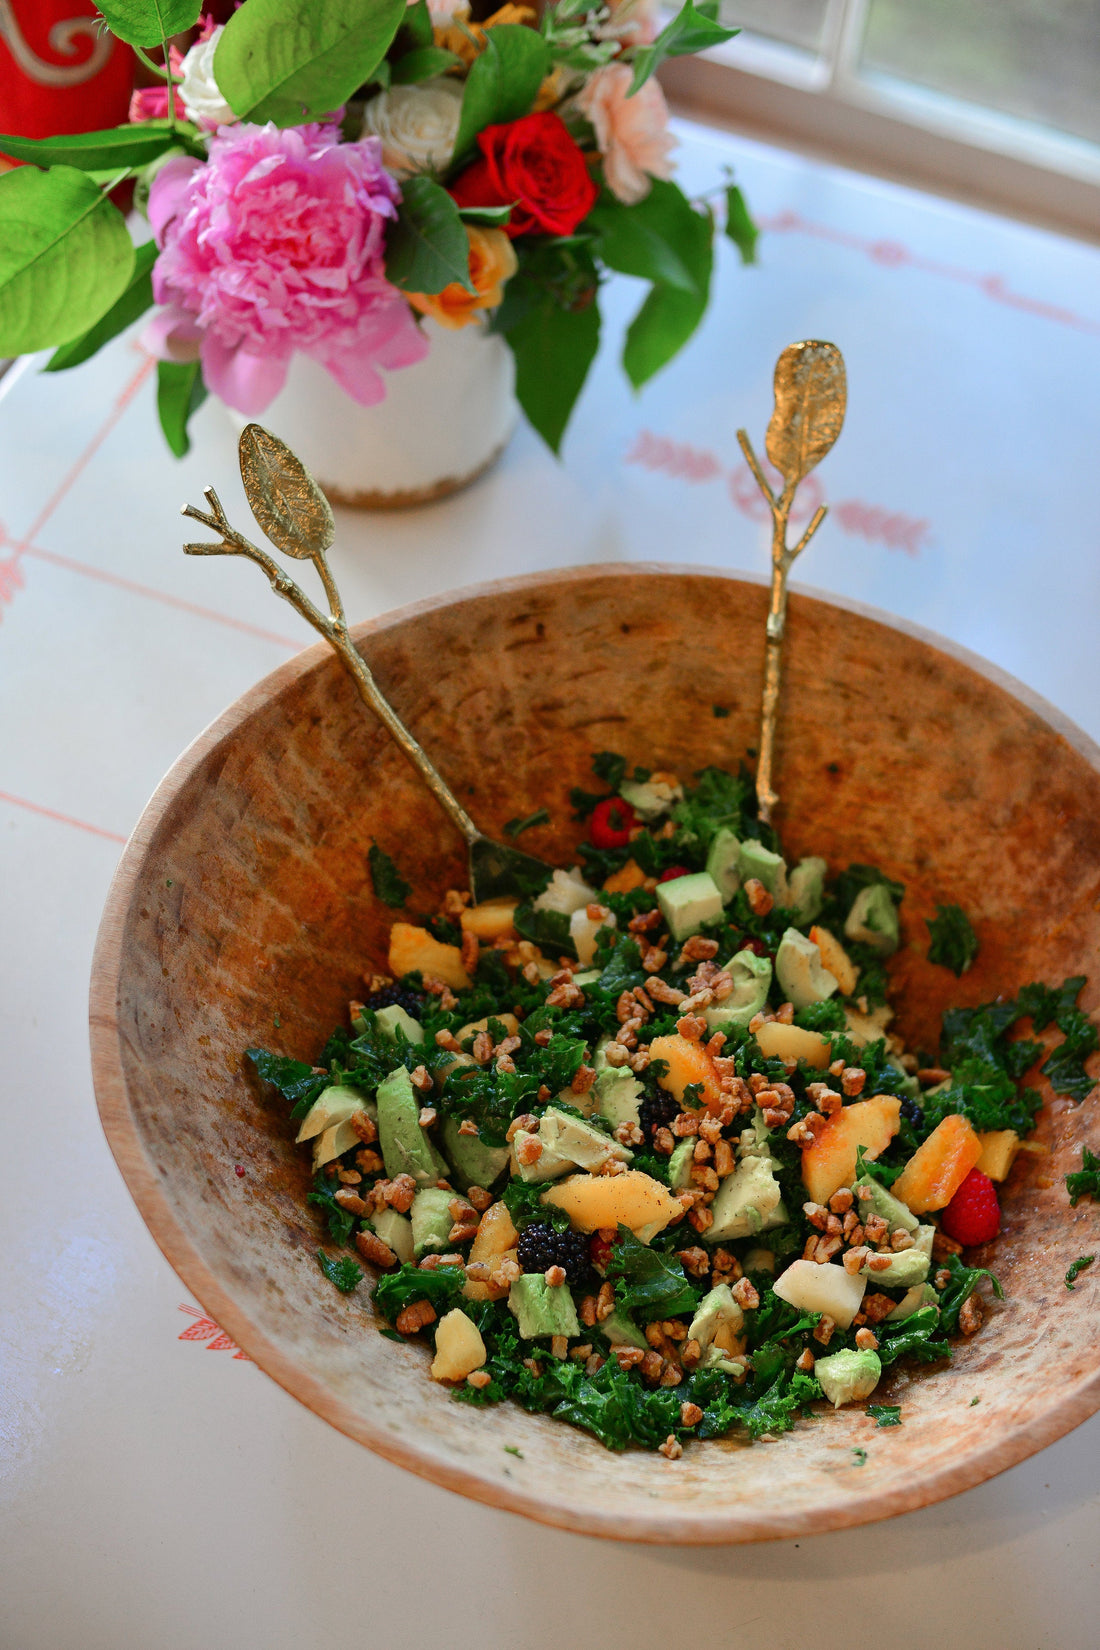 KALE SALAD WITH PECANS AND PEACHES